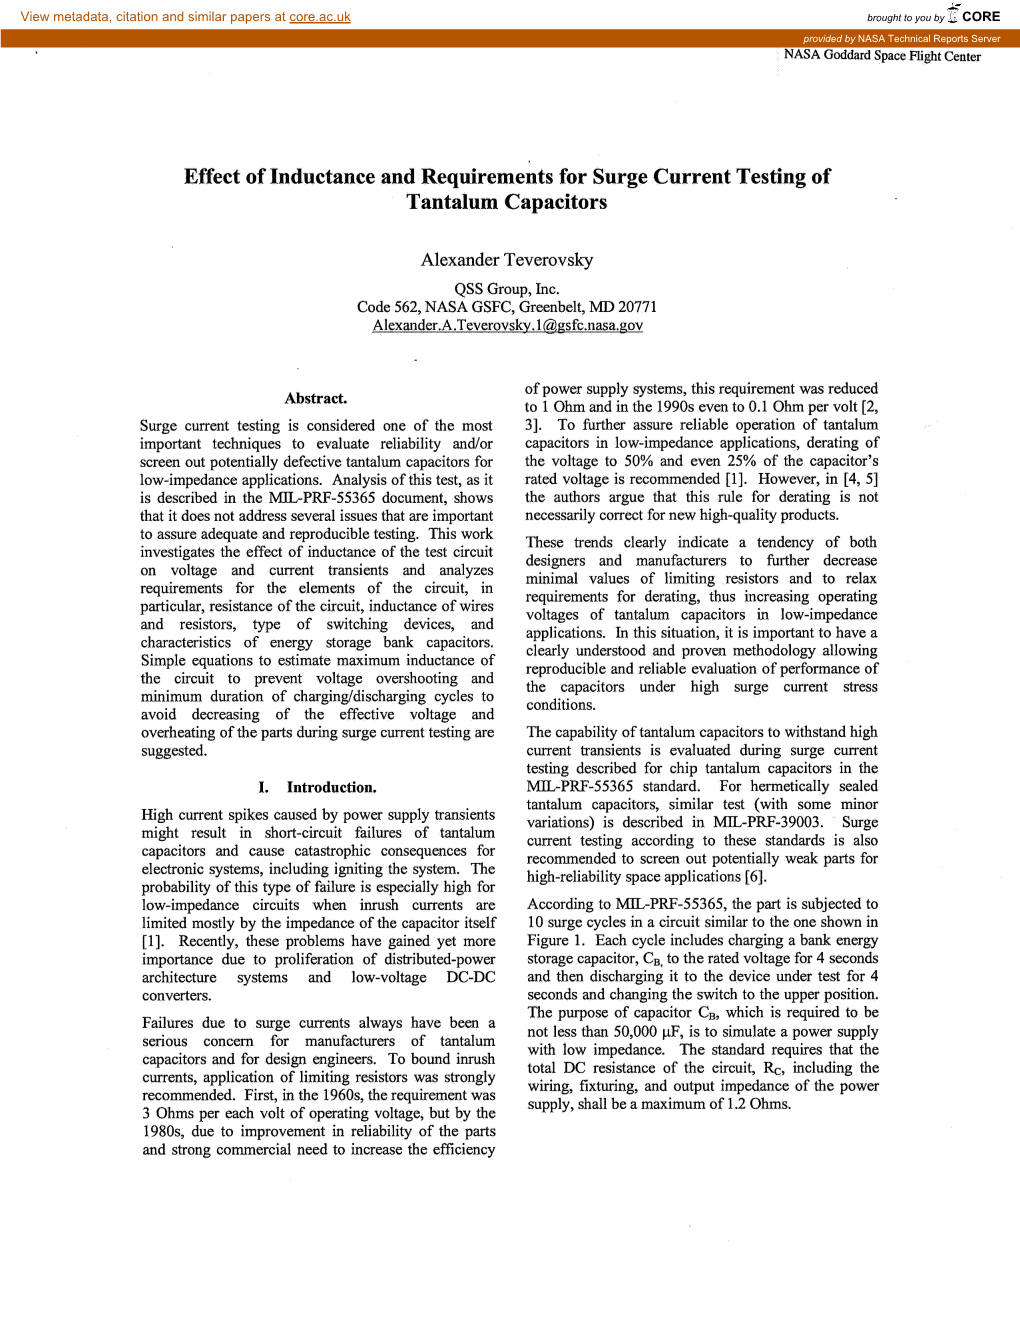 Effect of Inductance and Requirements for Surge Current Testing of Tantalum Capacitors